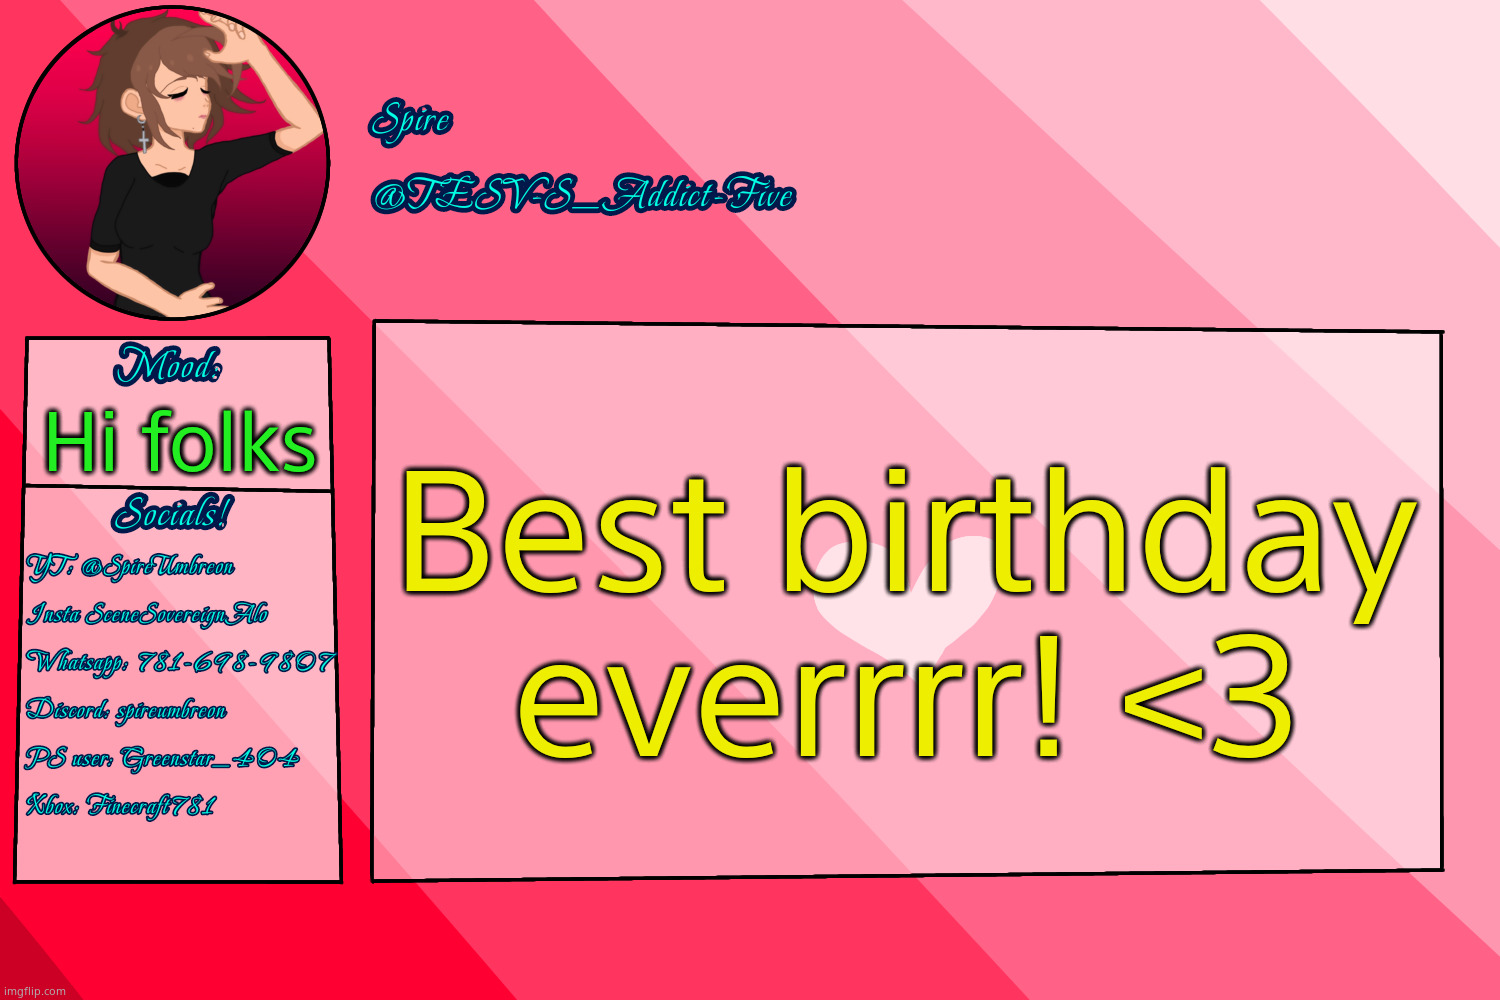 Minus the acid reflux.. | Best birthday everrrr! <3; Hi folks | image tagged in tesv-s_addict-five announcement template | made w/ Imgflip meme maker